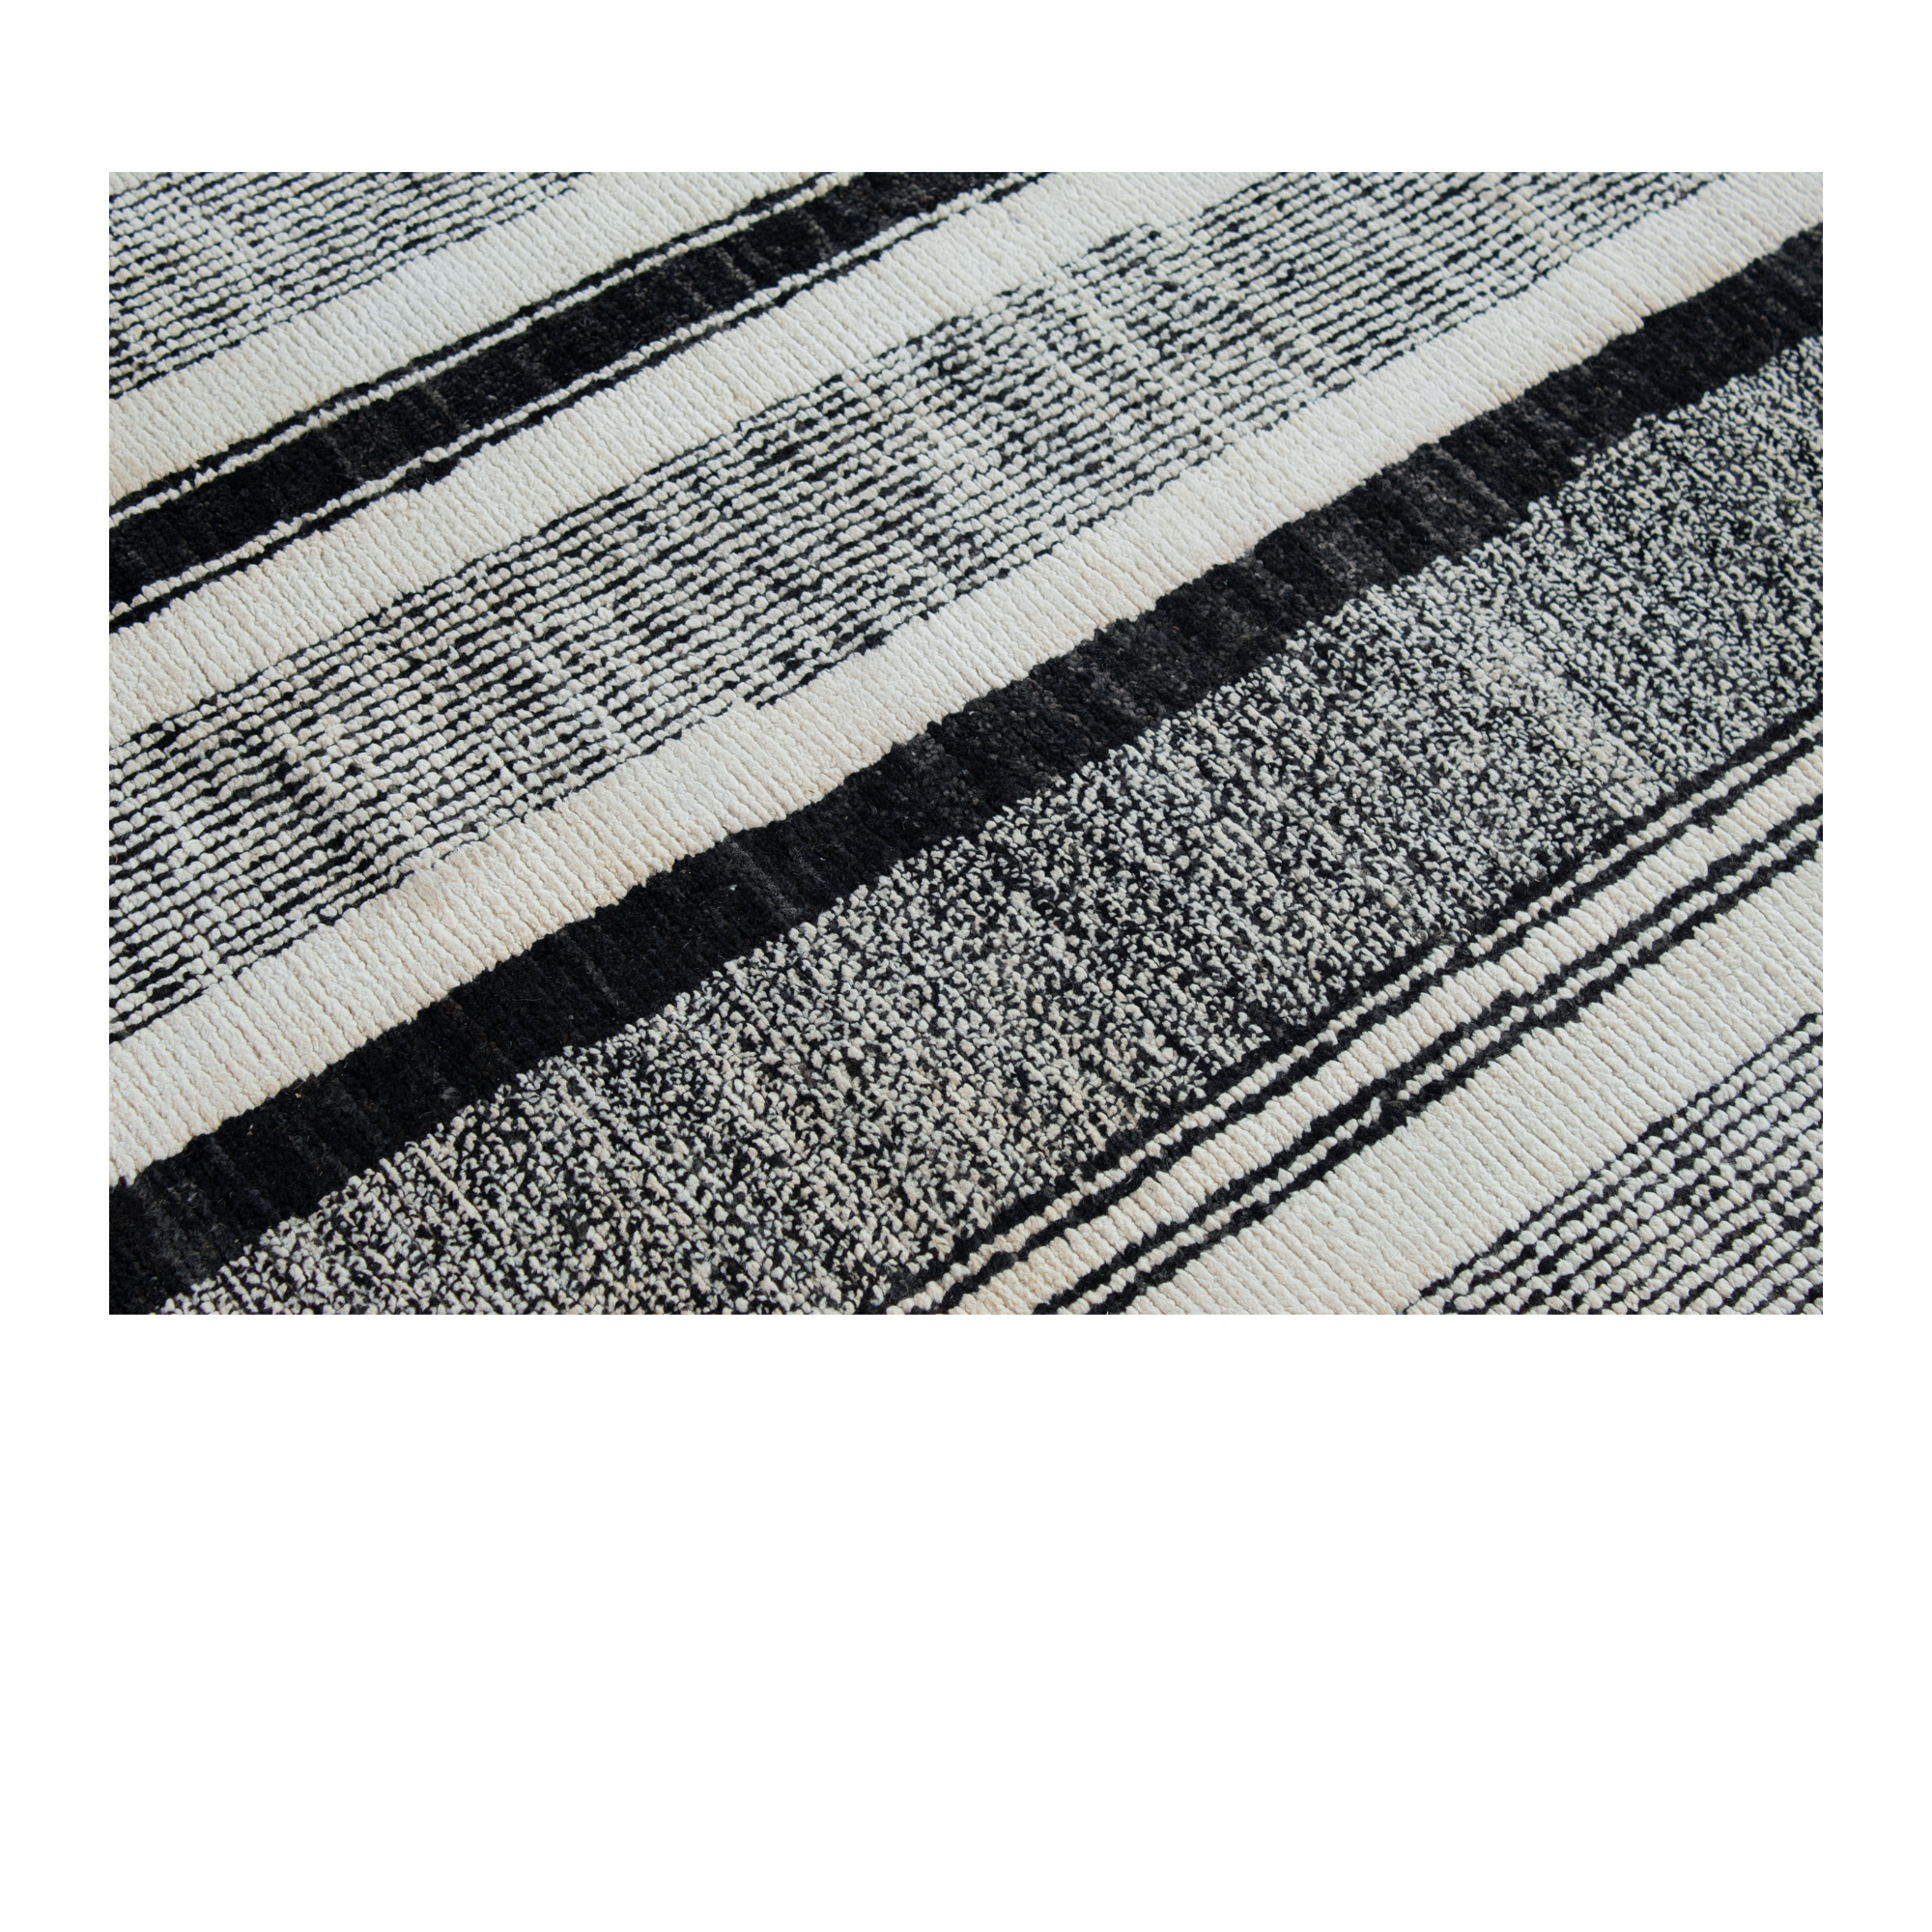 Hand-knotted black and white and modern rug.